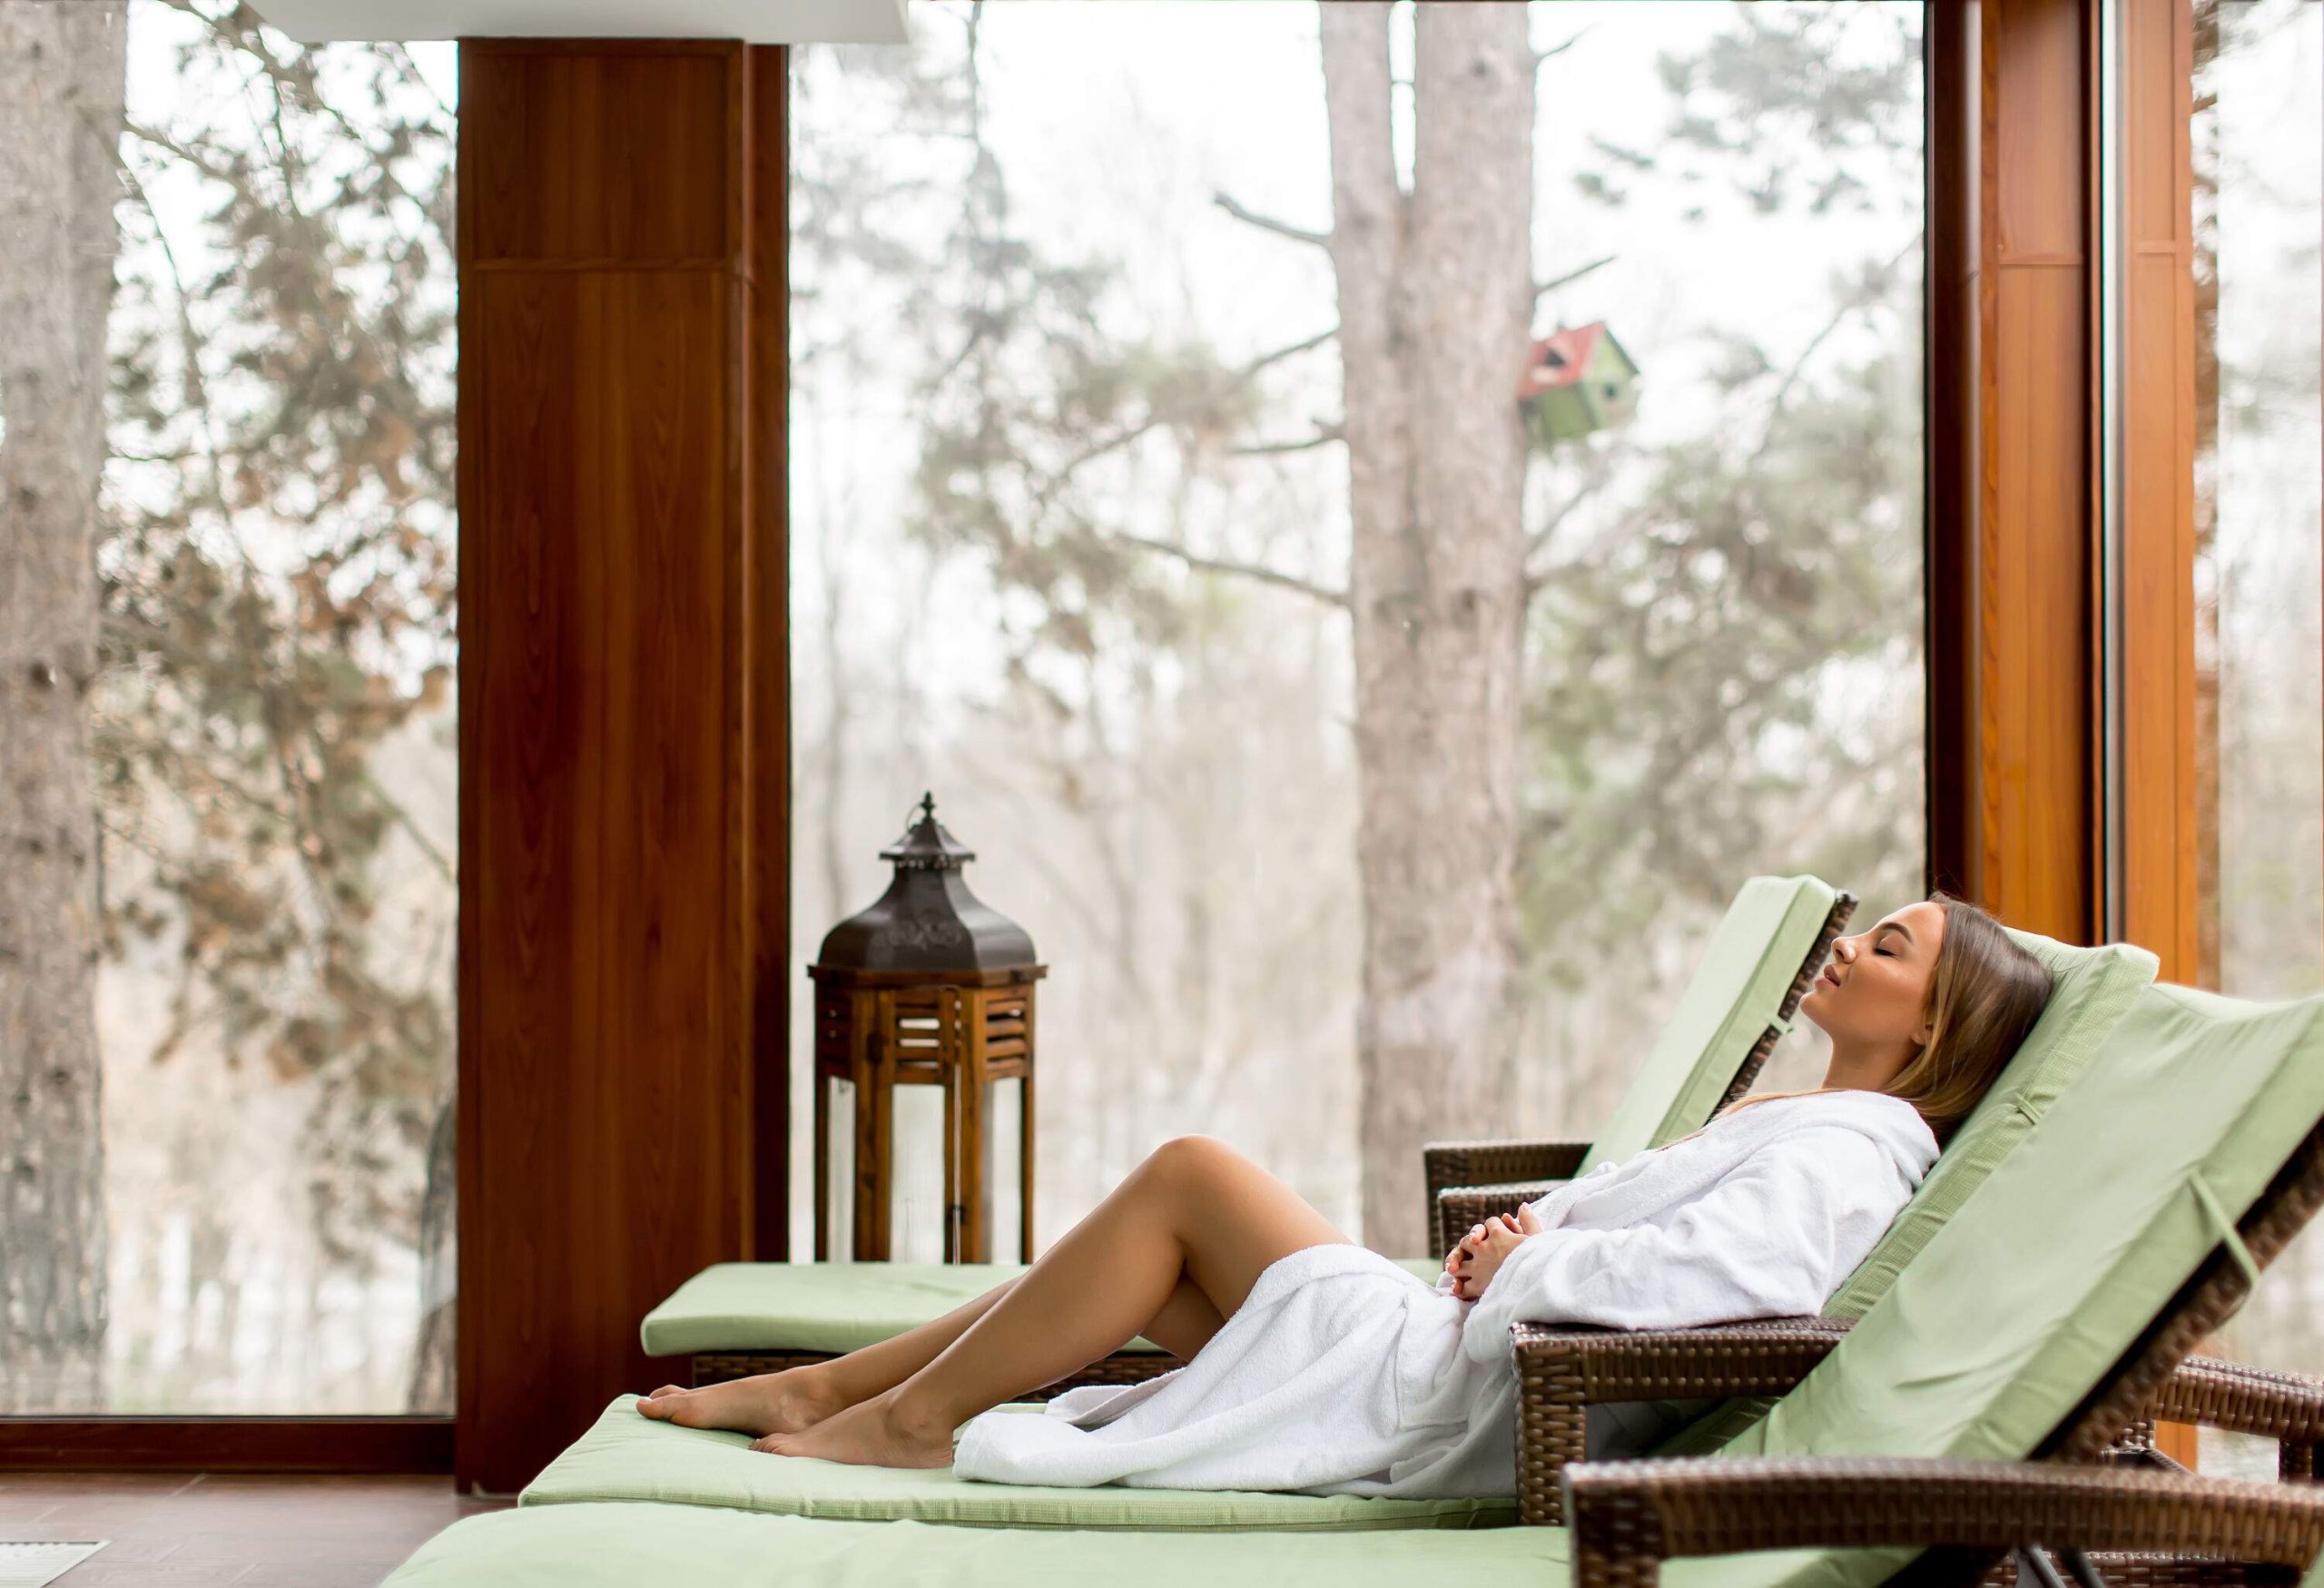 A woman in a white bathrobe rests on a reclining chair beside a big glass window with nature views.